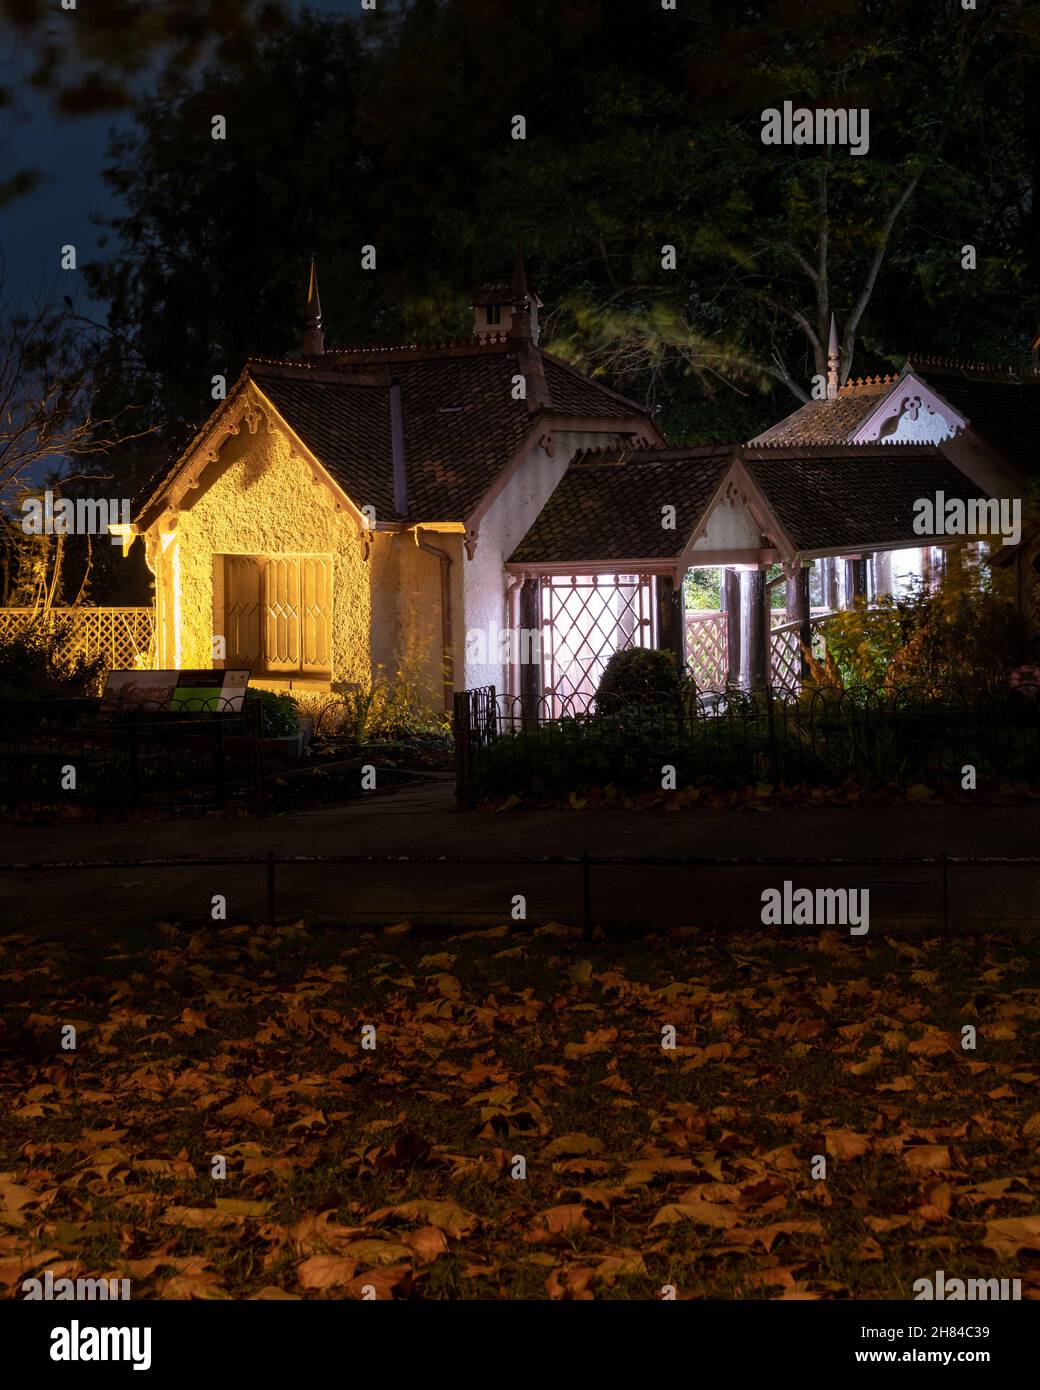 A night shot of Duck Island Cottage, St James's park, illuminated by warm yellow light with red/orange plane tree leaves on the ground. Stock Photo